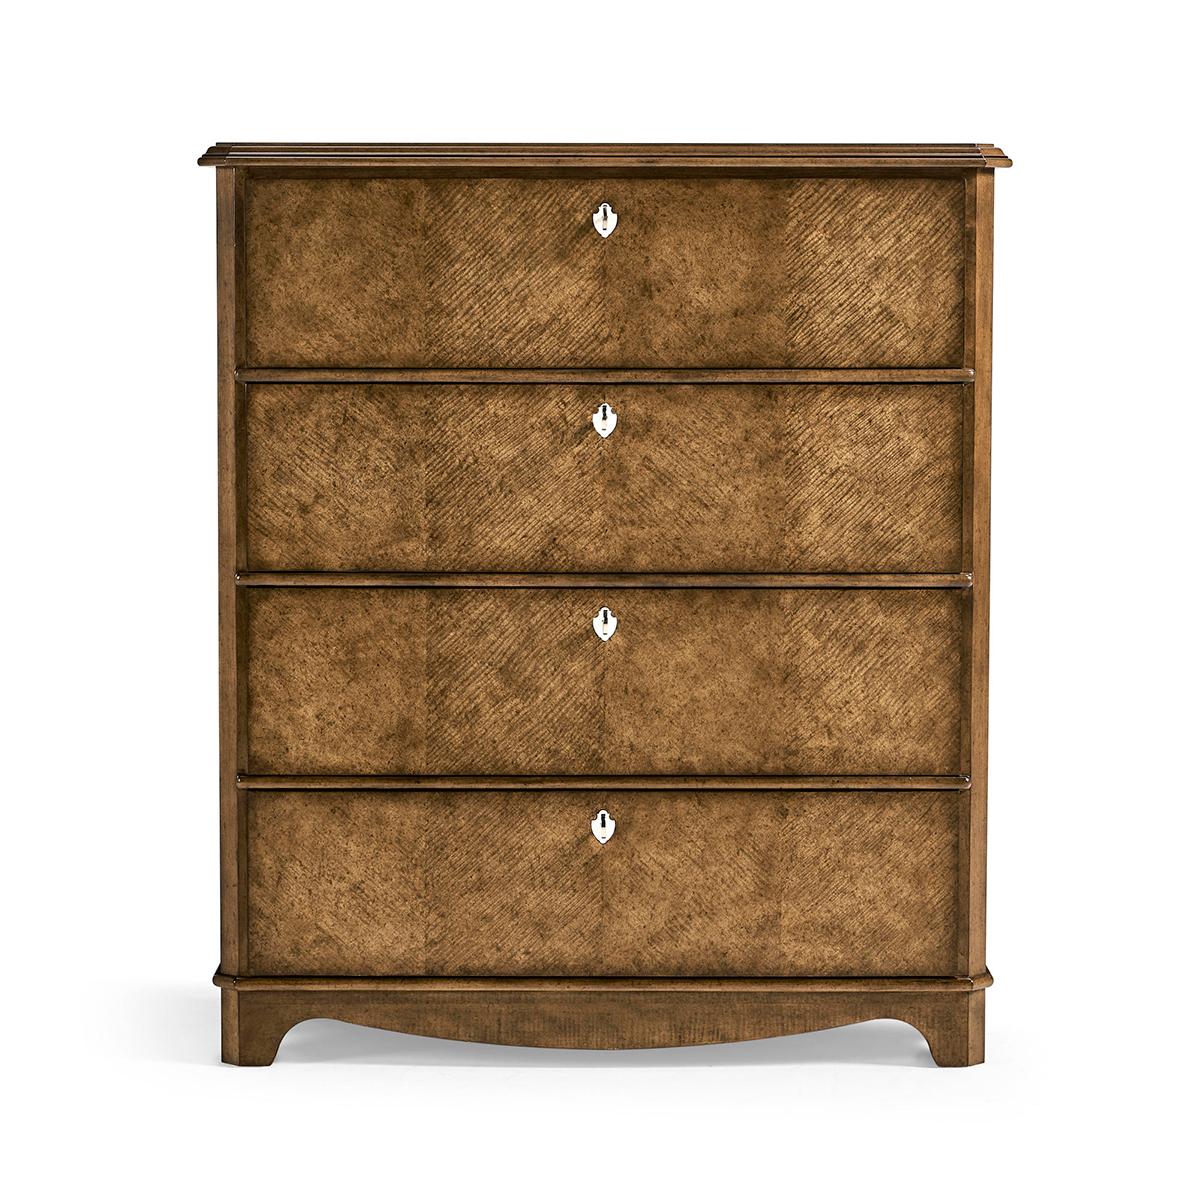 This stately chest is more than just a storage solution—it's a notable piece of decor that enhances the ambiance of your space.

Constructed from solid maple and adorned with sycamore quartered veneer, the dresser boasts durability and a premium